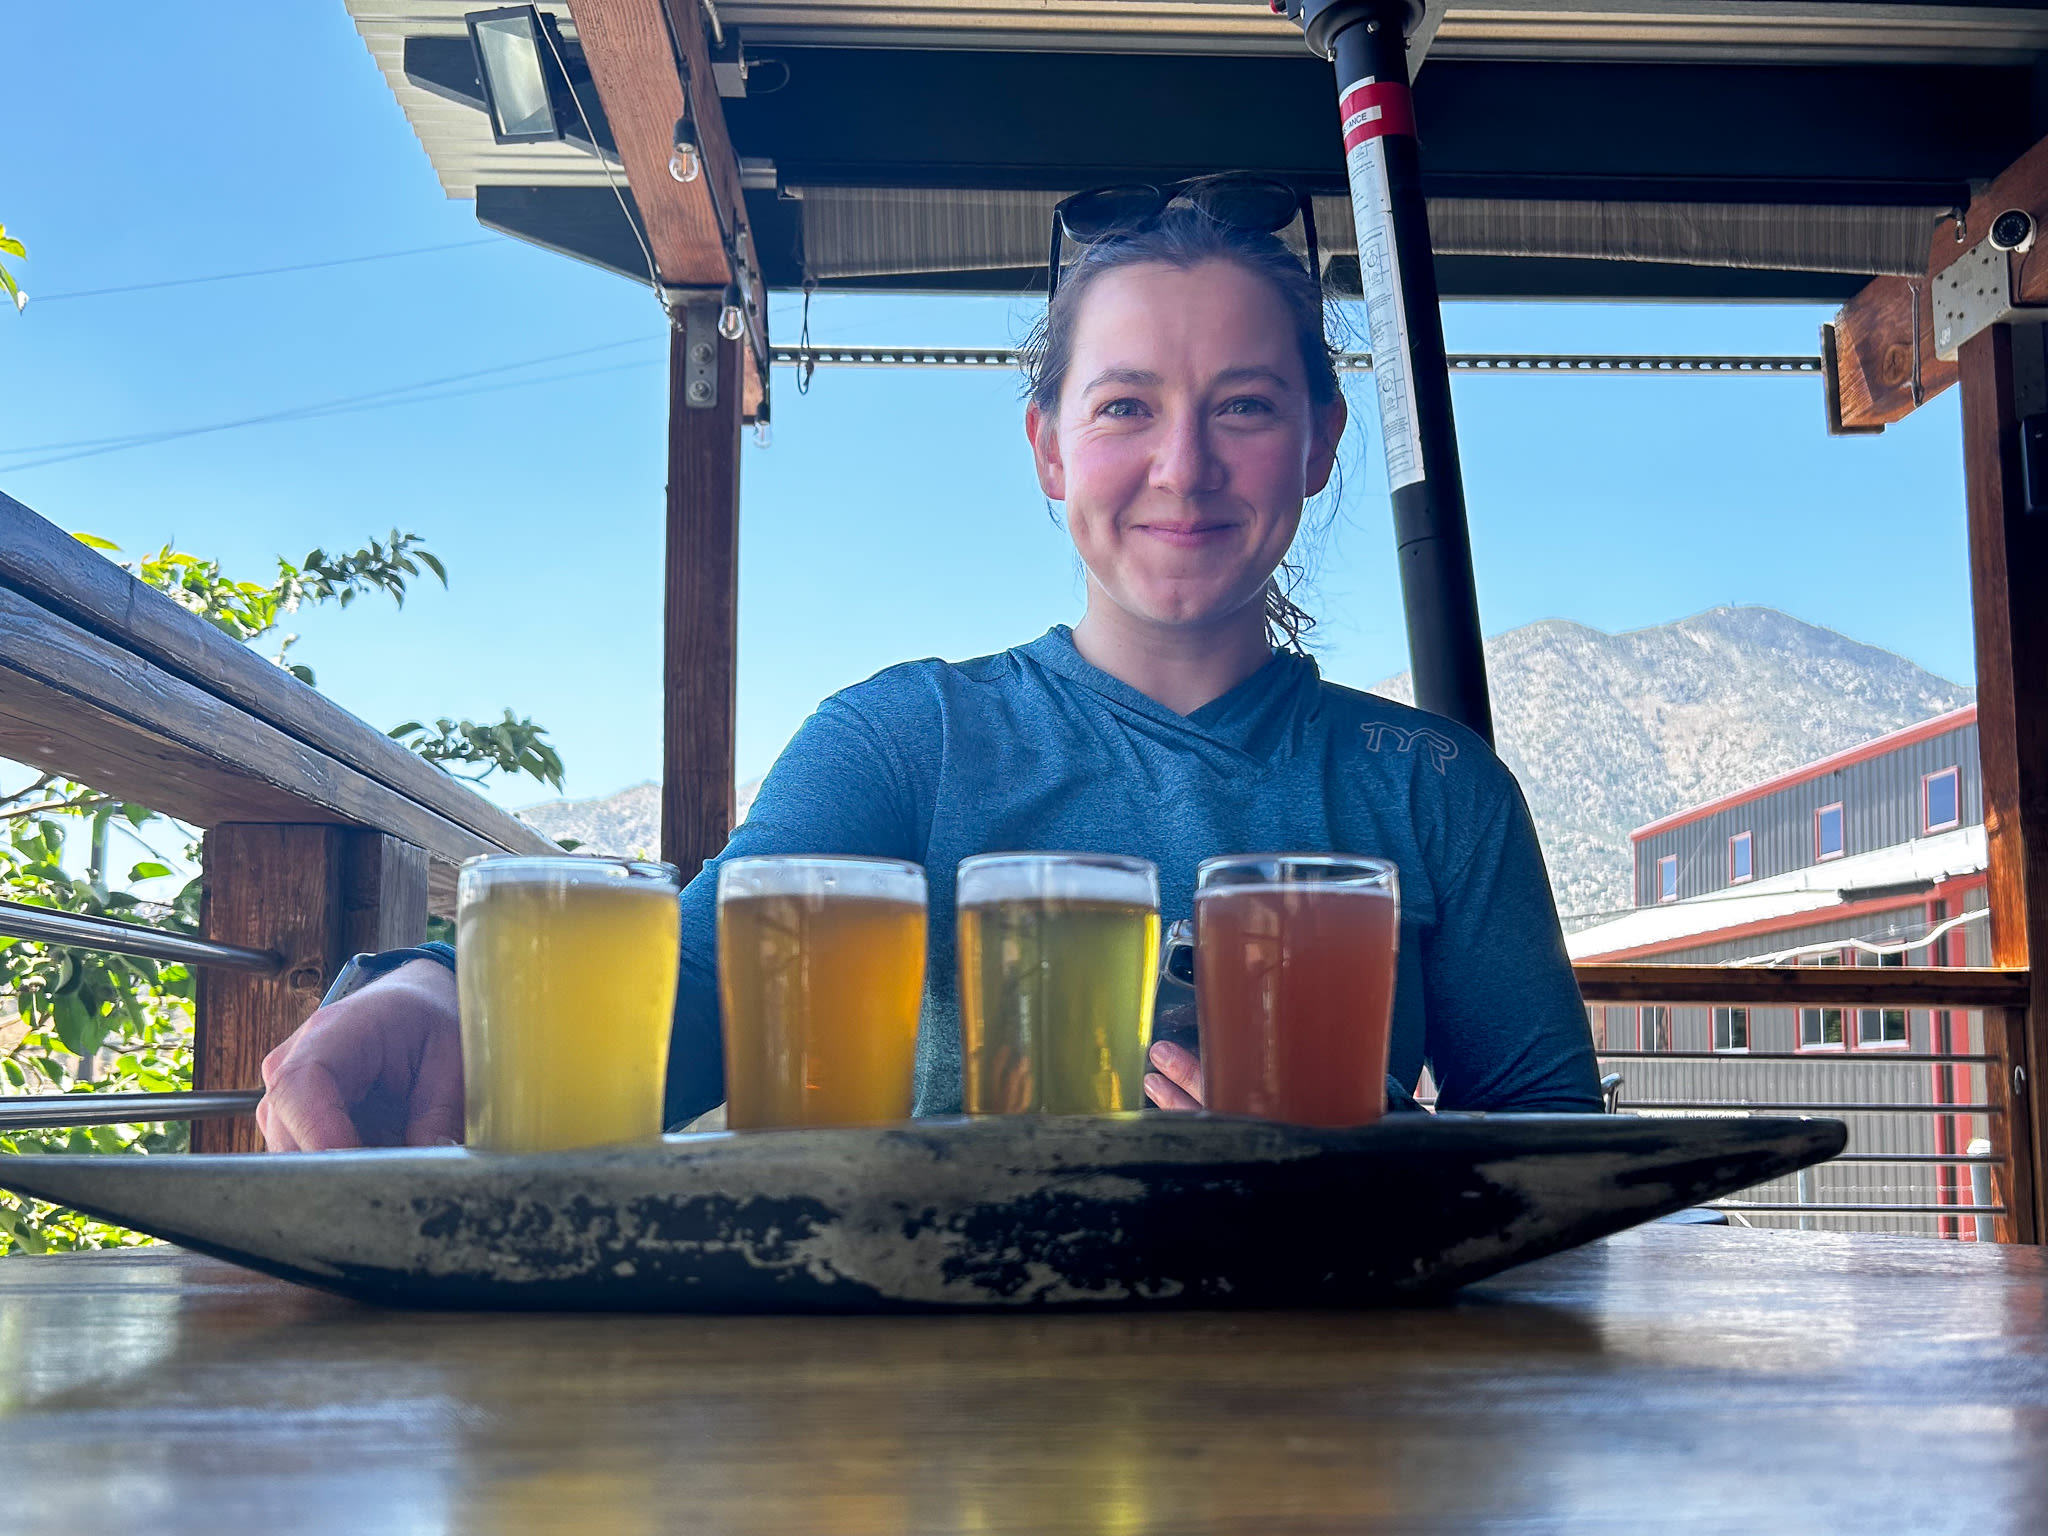 Brewery Rowe: Travel writer explores 'Beer Hiking' in Southern California